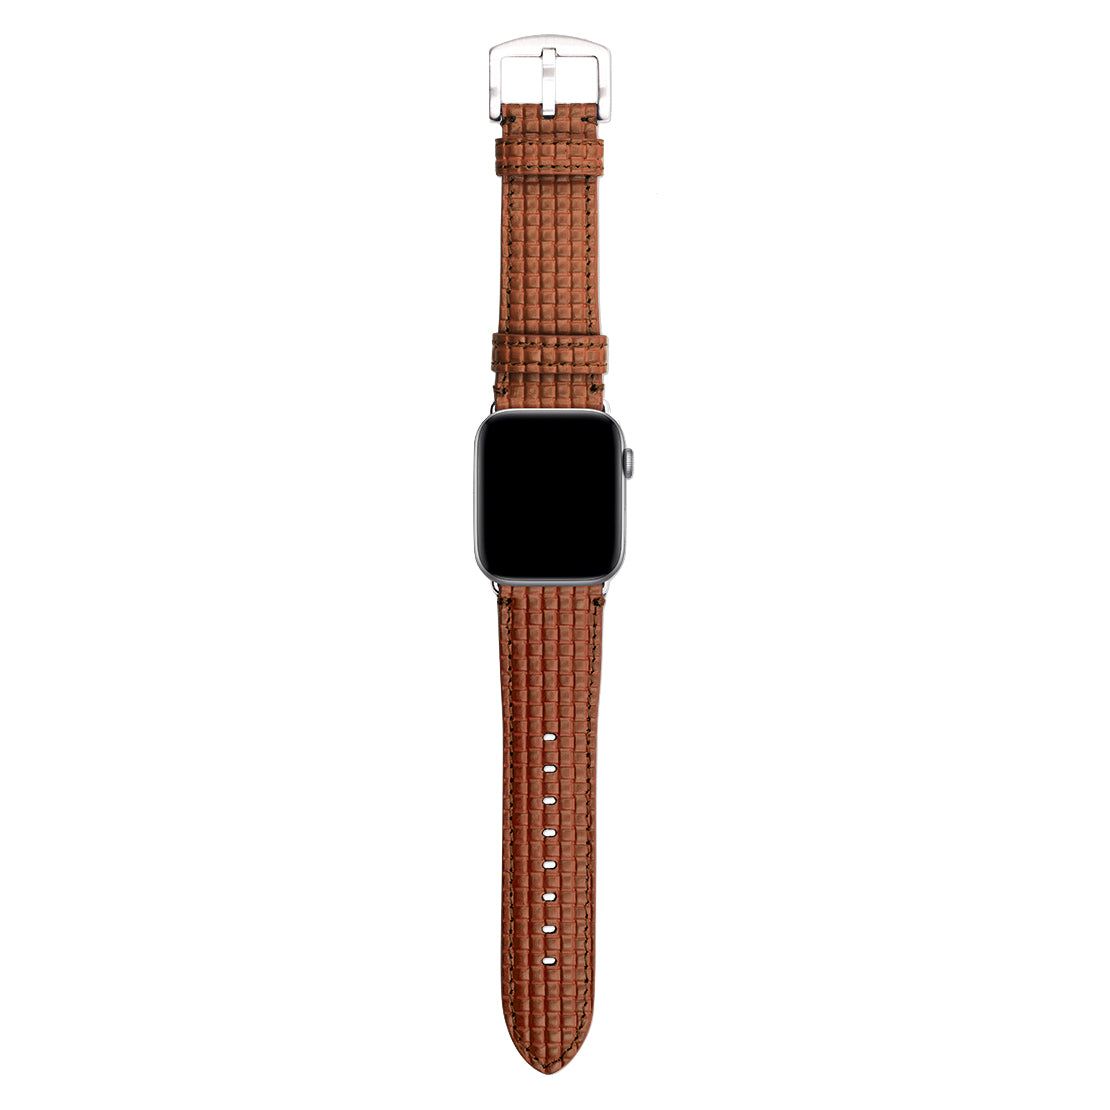 Genuine Leather Grass Pattern Handcrafted Apple Watch Band-Watch Band- phone case - phone cases- phone cover- iphone cover- iphone case- iphone cases- leather case- leather cases- DIYCASE - custom case - leather cover - hand strap case - croco pattern case - snake pattern case - carbon fiber phone case - phone case brand - unique phone case - high quality - phone case brand - protective case - buy phone case hong kong - online buy phone case - iphone‎手機殼 - 客製化手機殼 - samsung ‎手機殼 - 香港手機殼 - 買電話殼